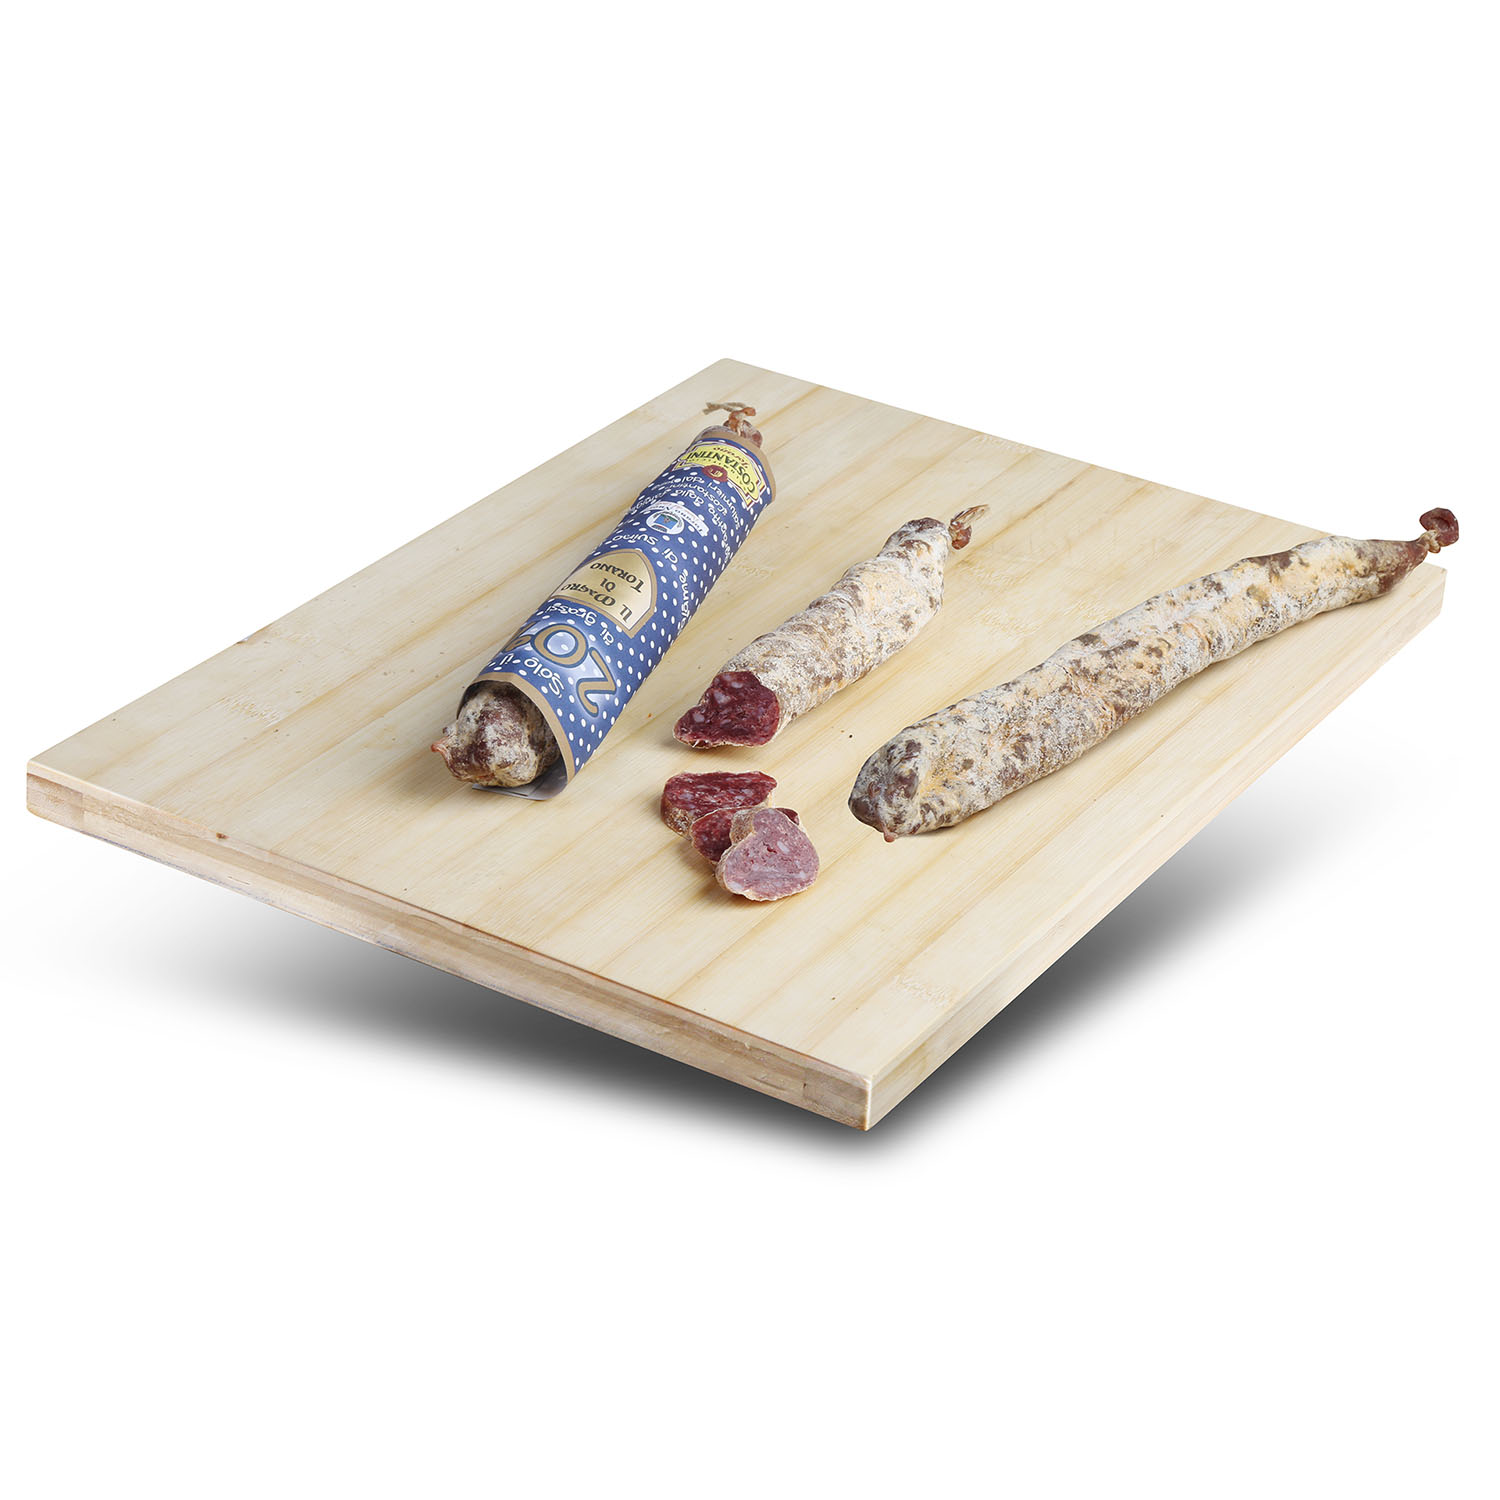 Salame “Il Magro”